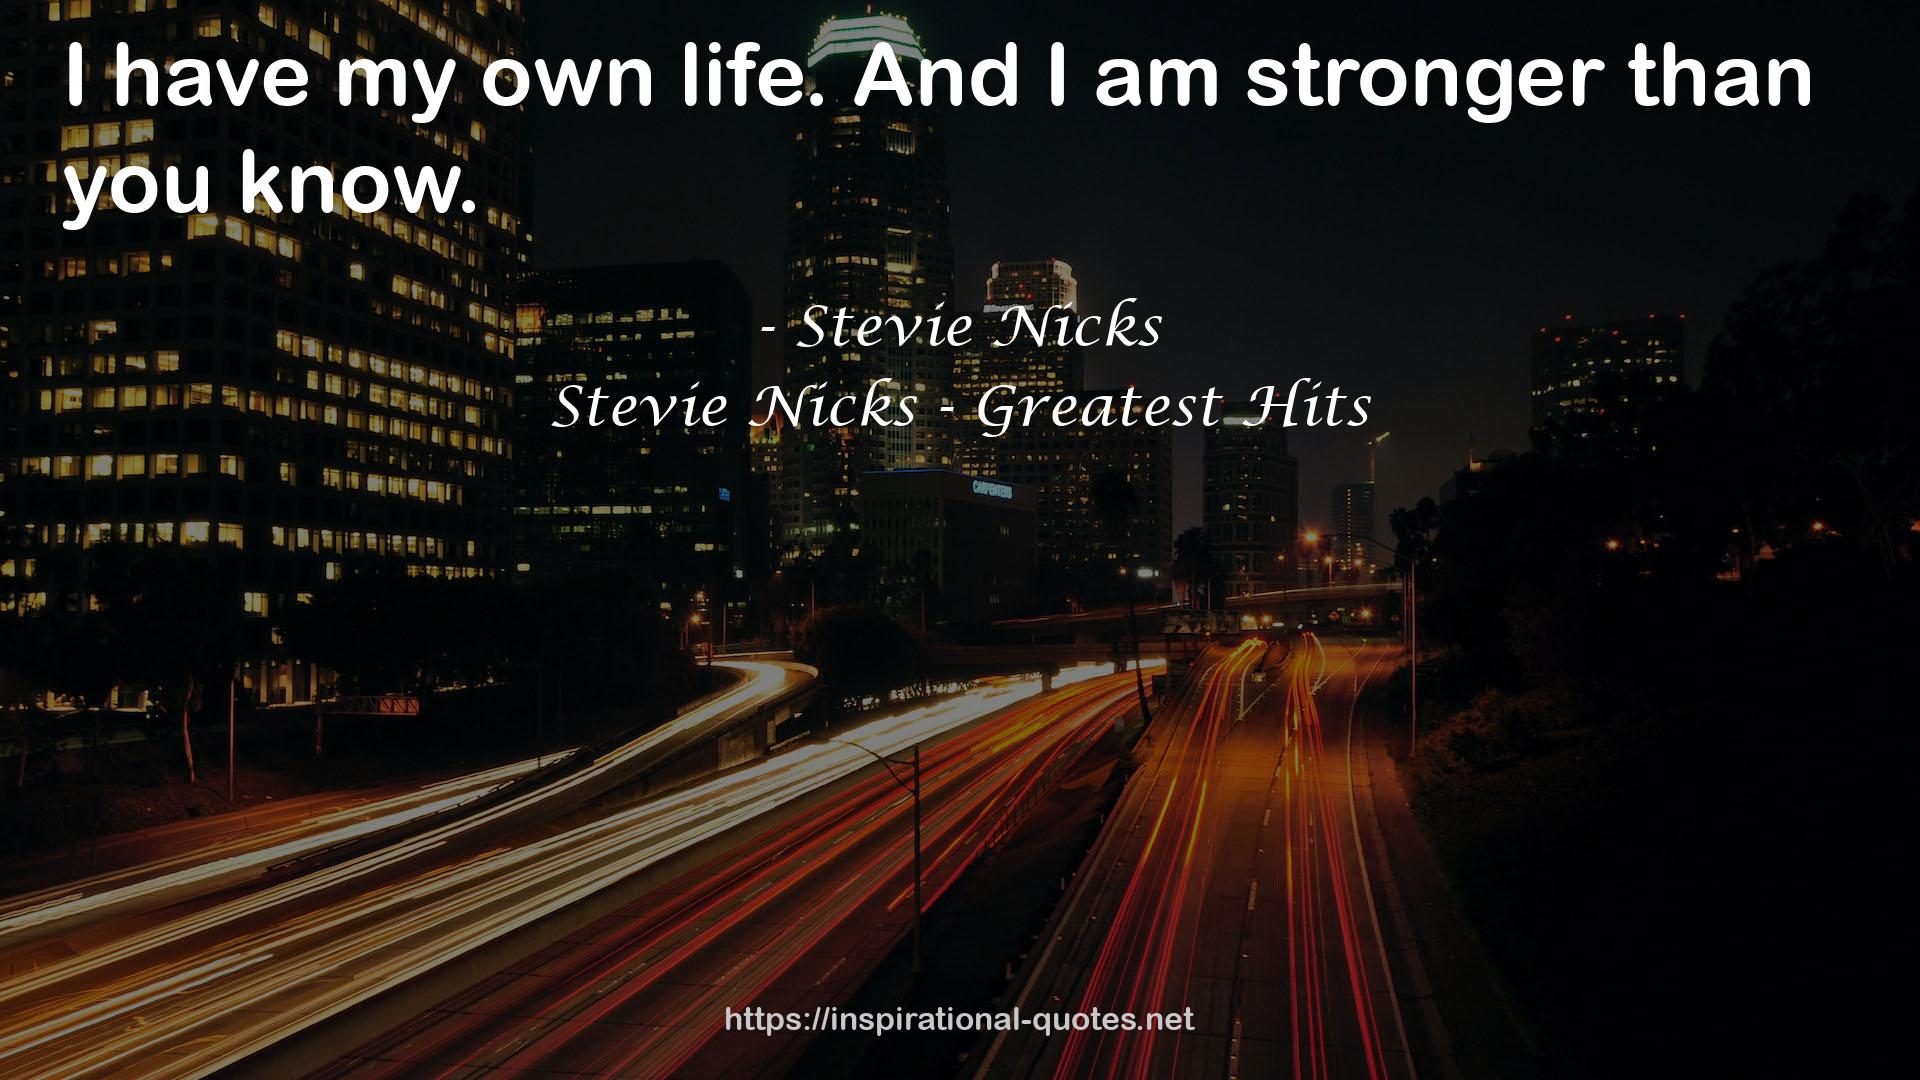 Stevie Nicks - Greatest Hits QUOTES